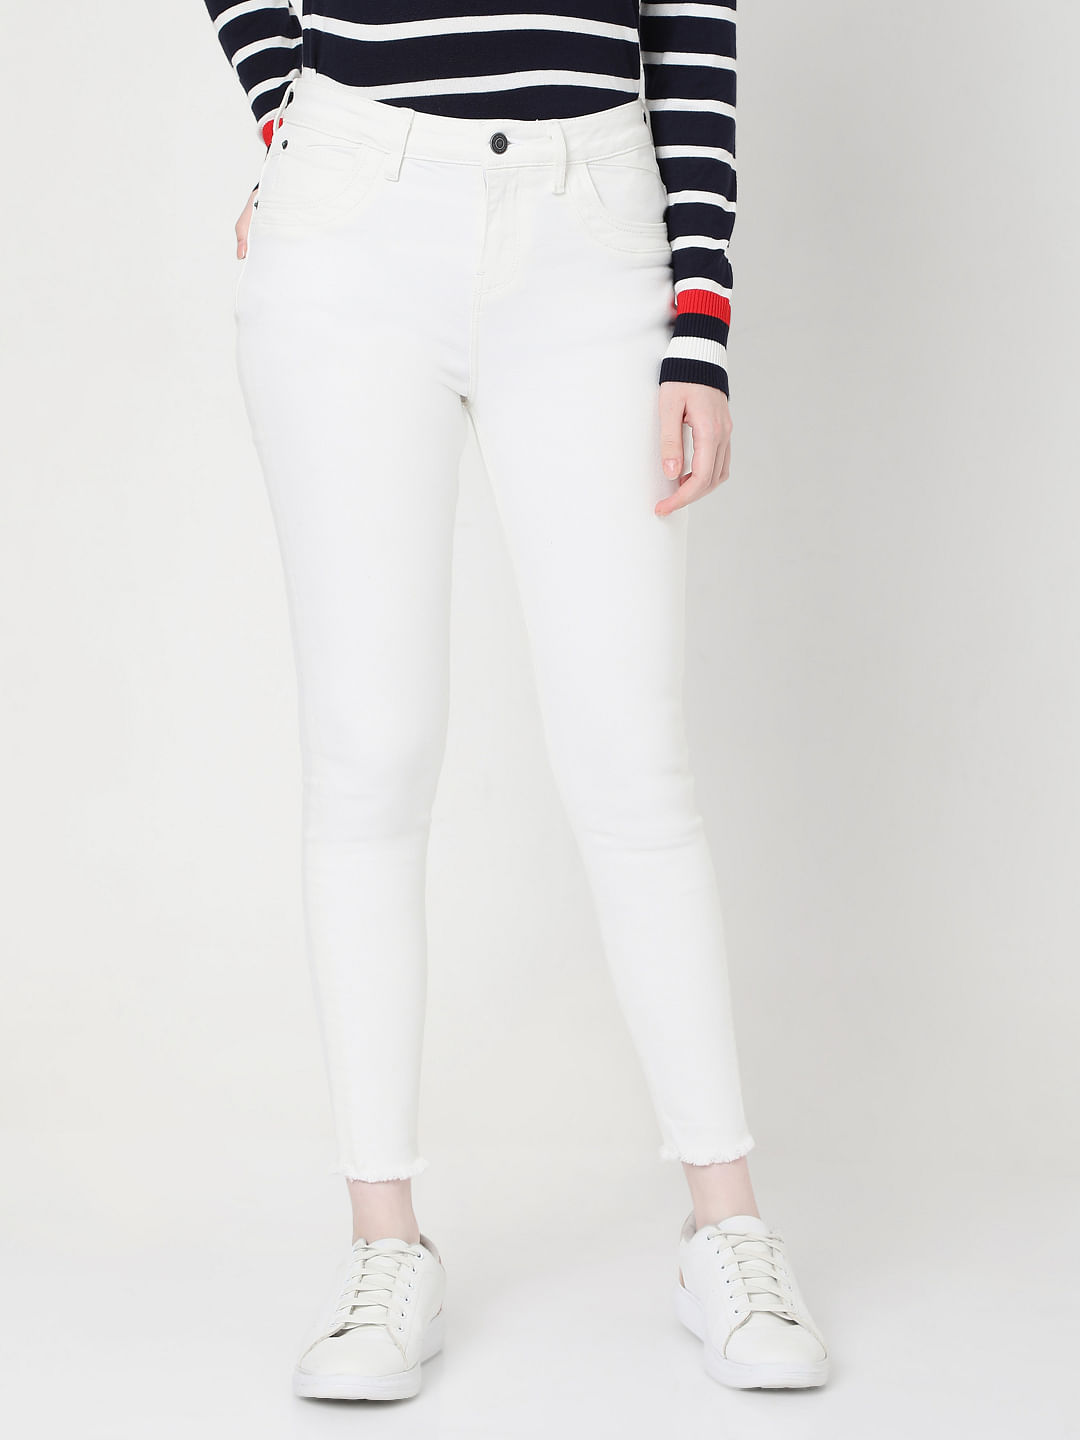 PERFECT FASHION Skinny Women White Jeans  Buy PERFECT FASHION Skinny Women White  Jeans Online at Best Prices in India  Flipkartcom